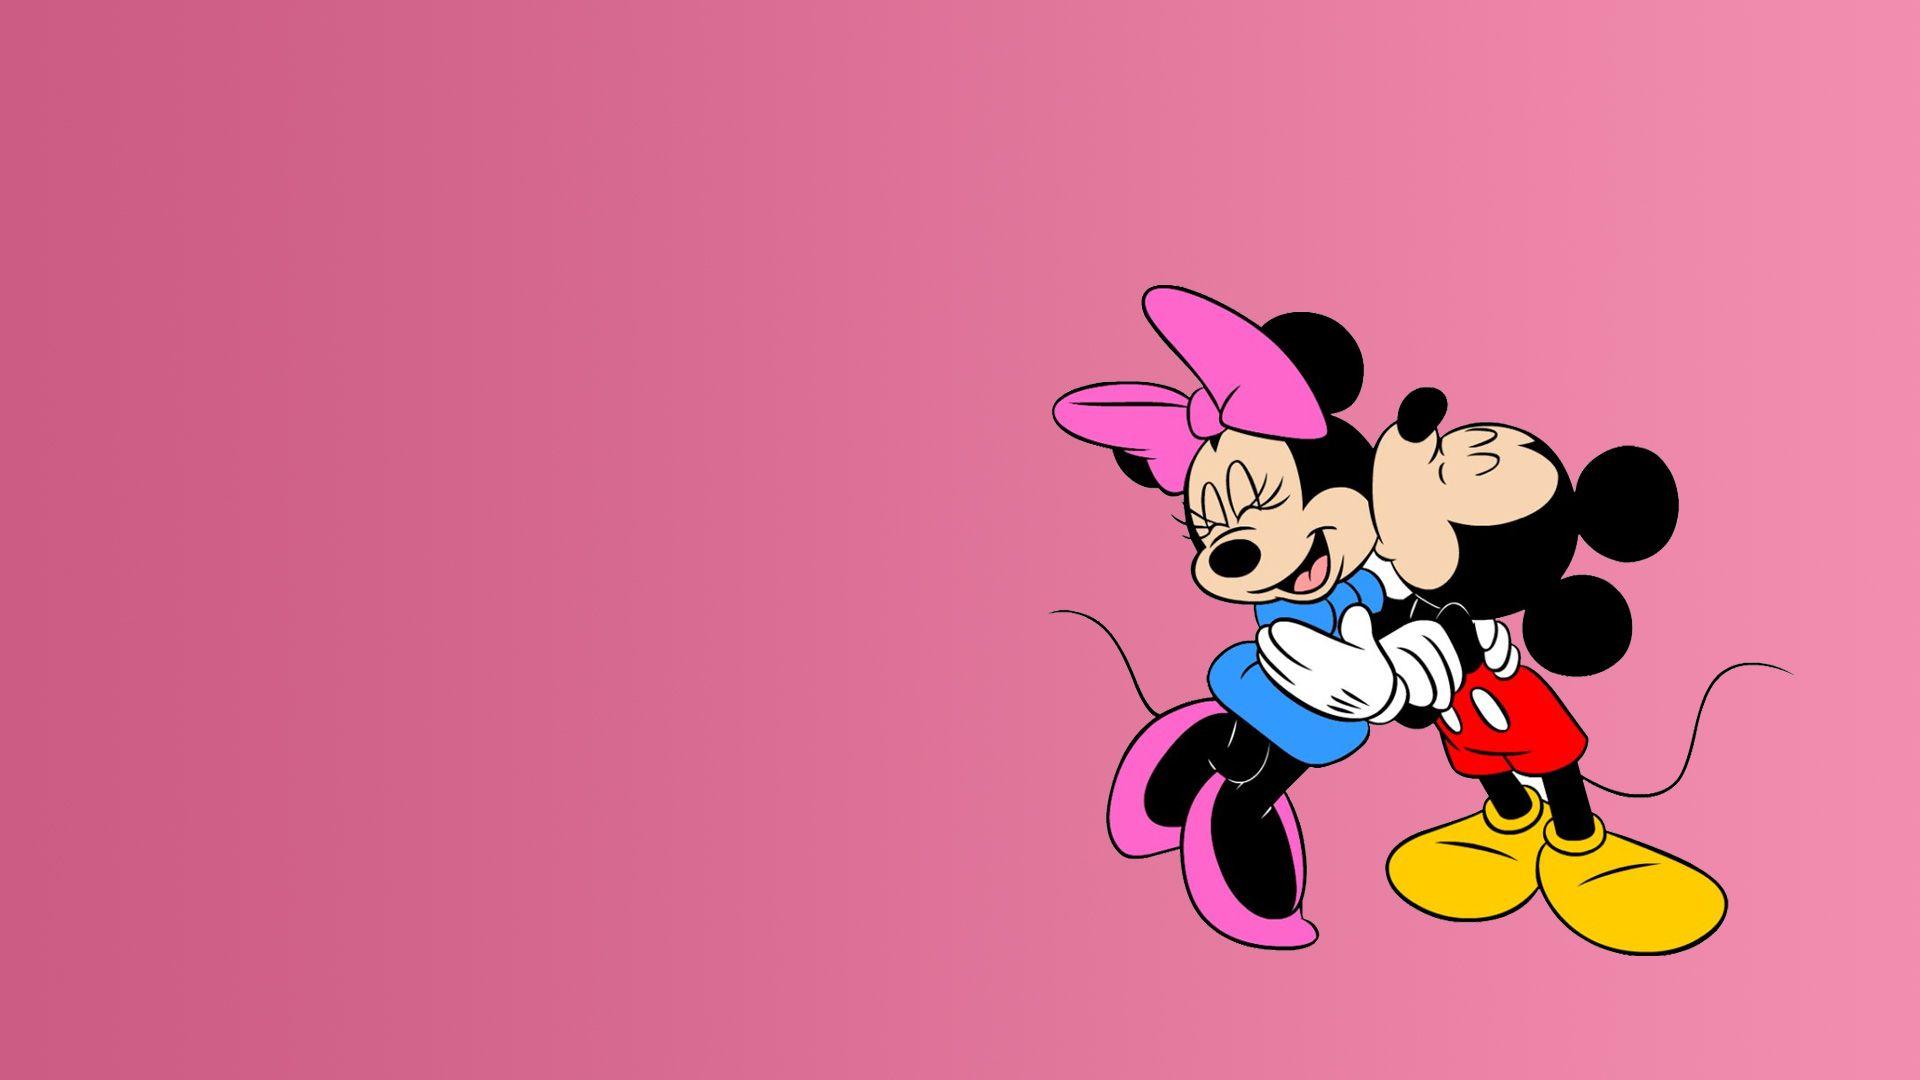 Wallpaper For > Baby Mickey And Minnie Mouse Wallpaper